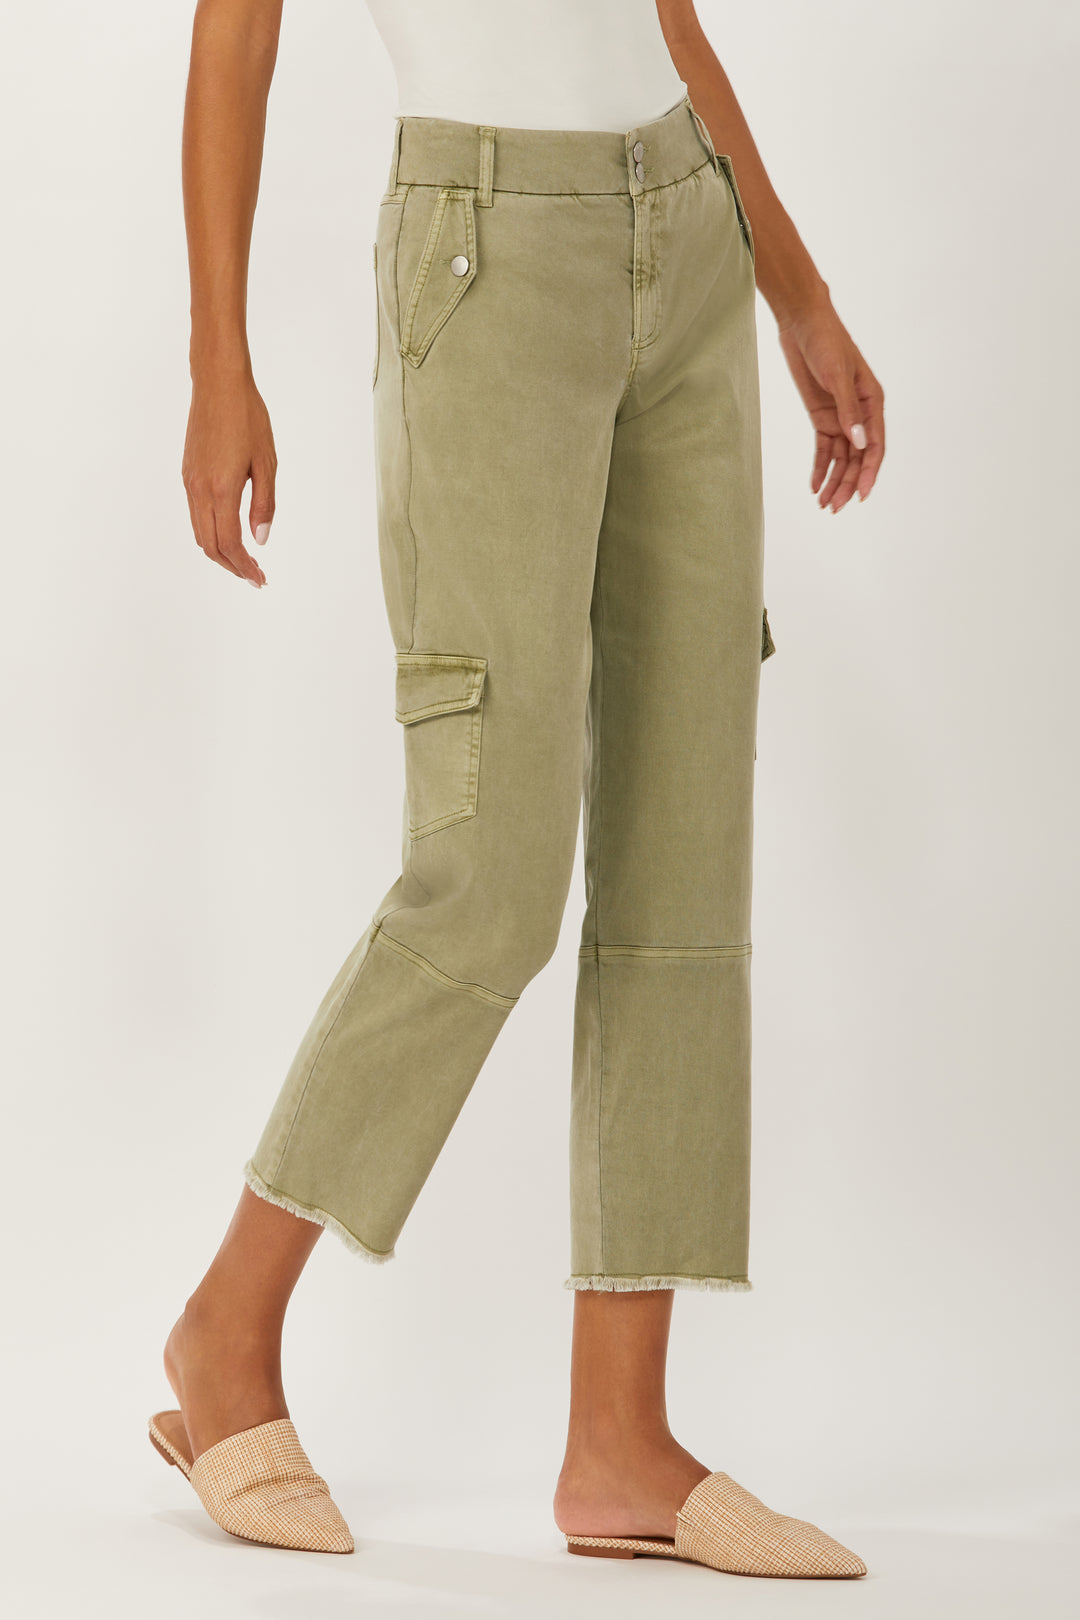 Crosby Utility Pant - Soft Olive